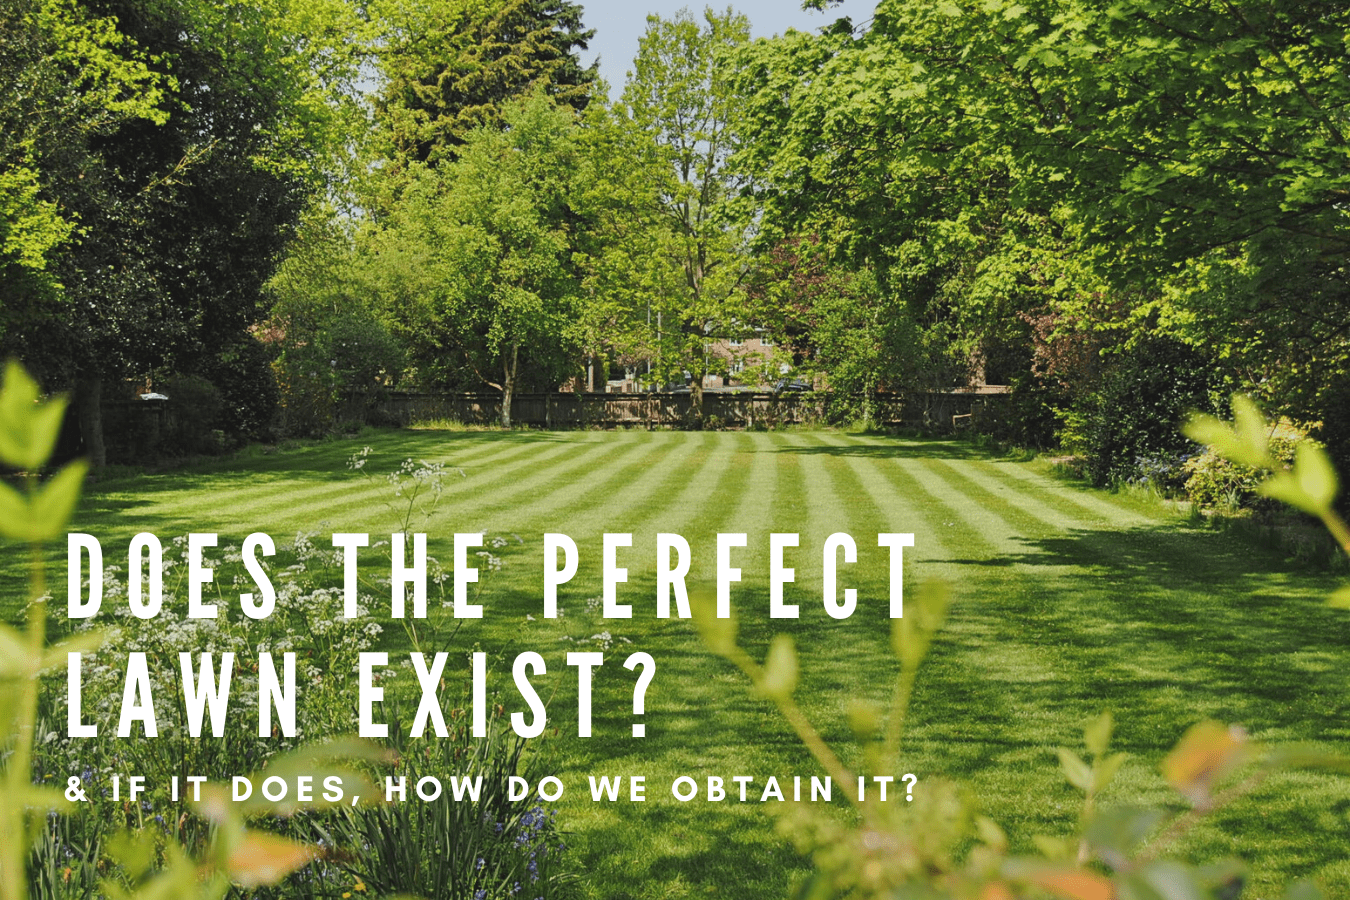 Does the perfect lawn exist? and if it does, how do we obtain it.